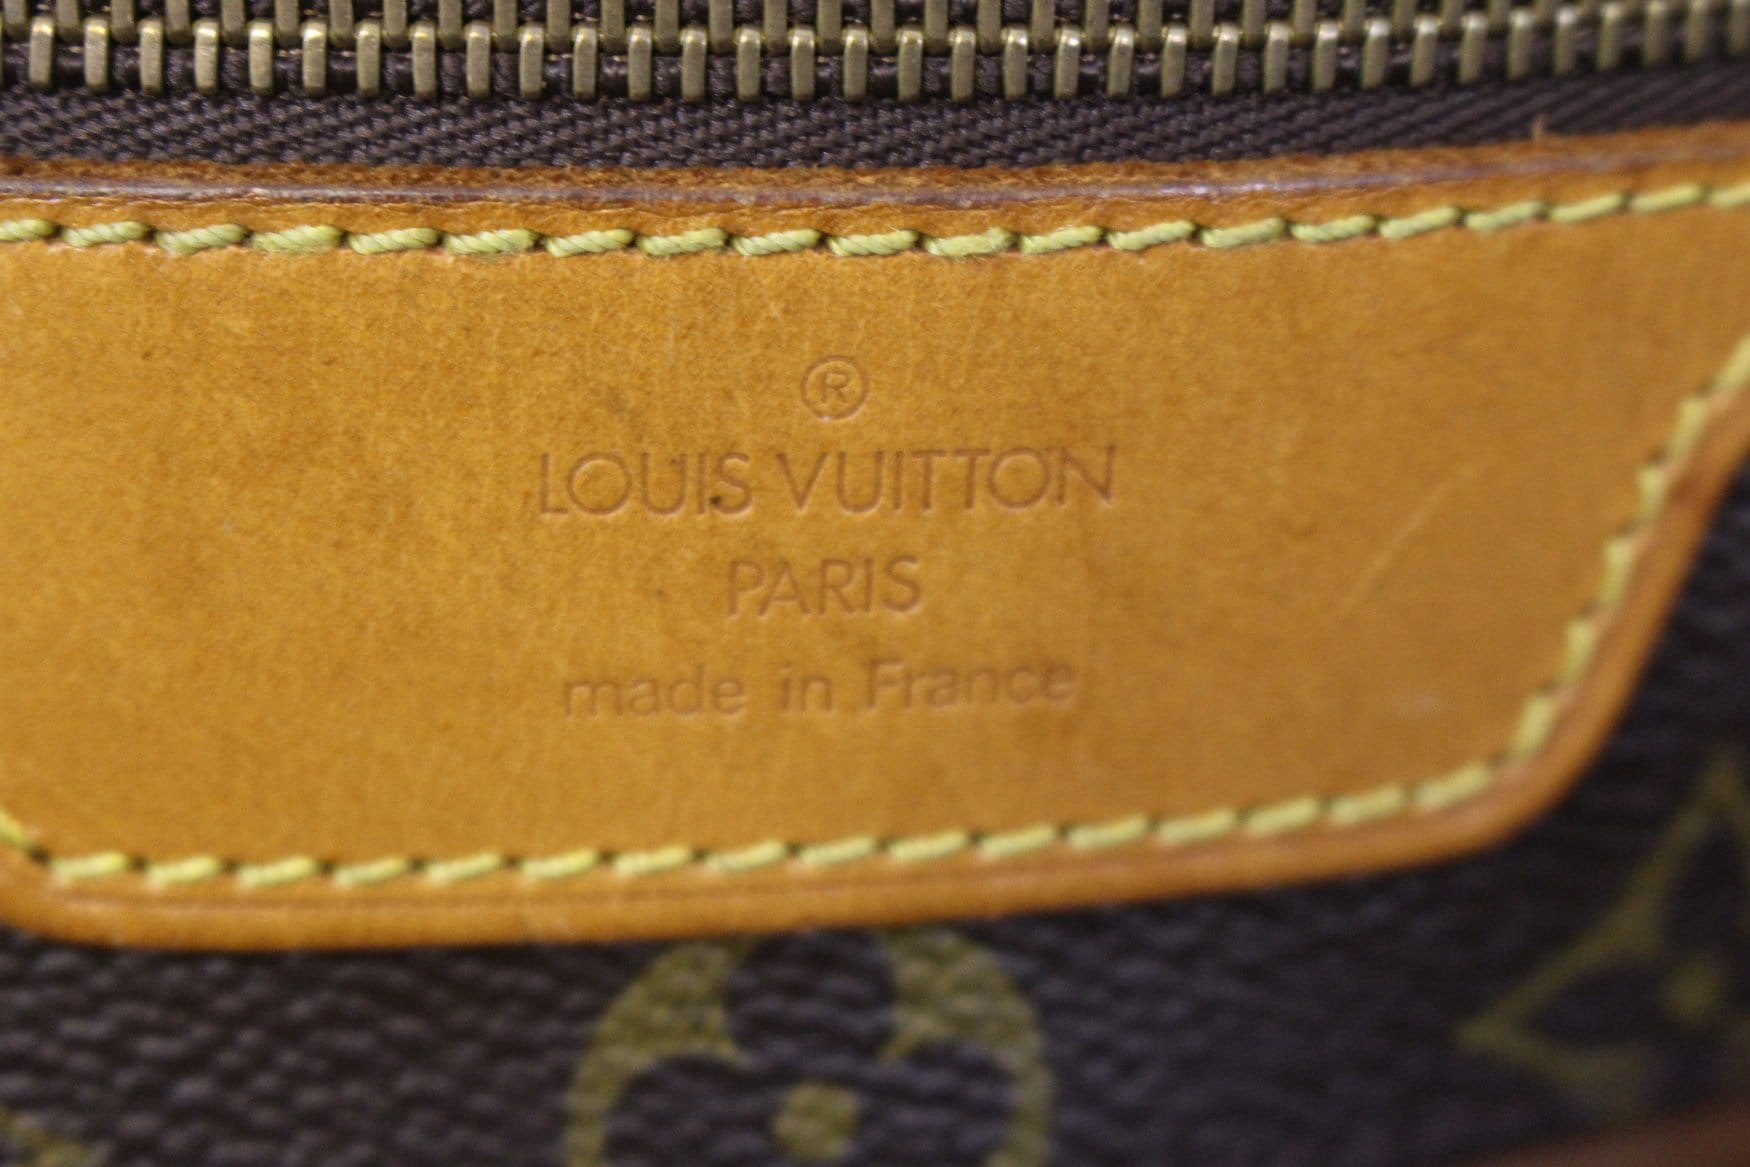 ❤️UPDATED REVIEW- Louis Vuitton Sac Shopping Tote 